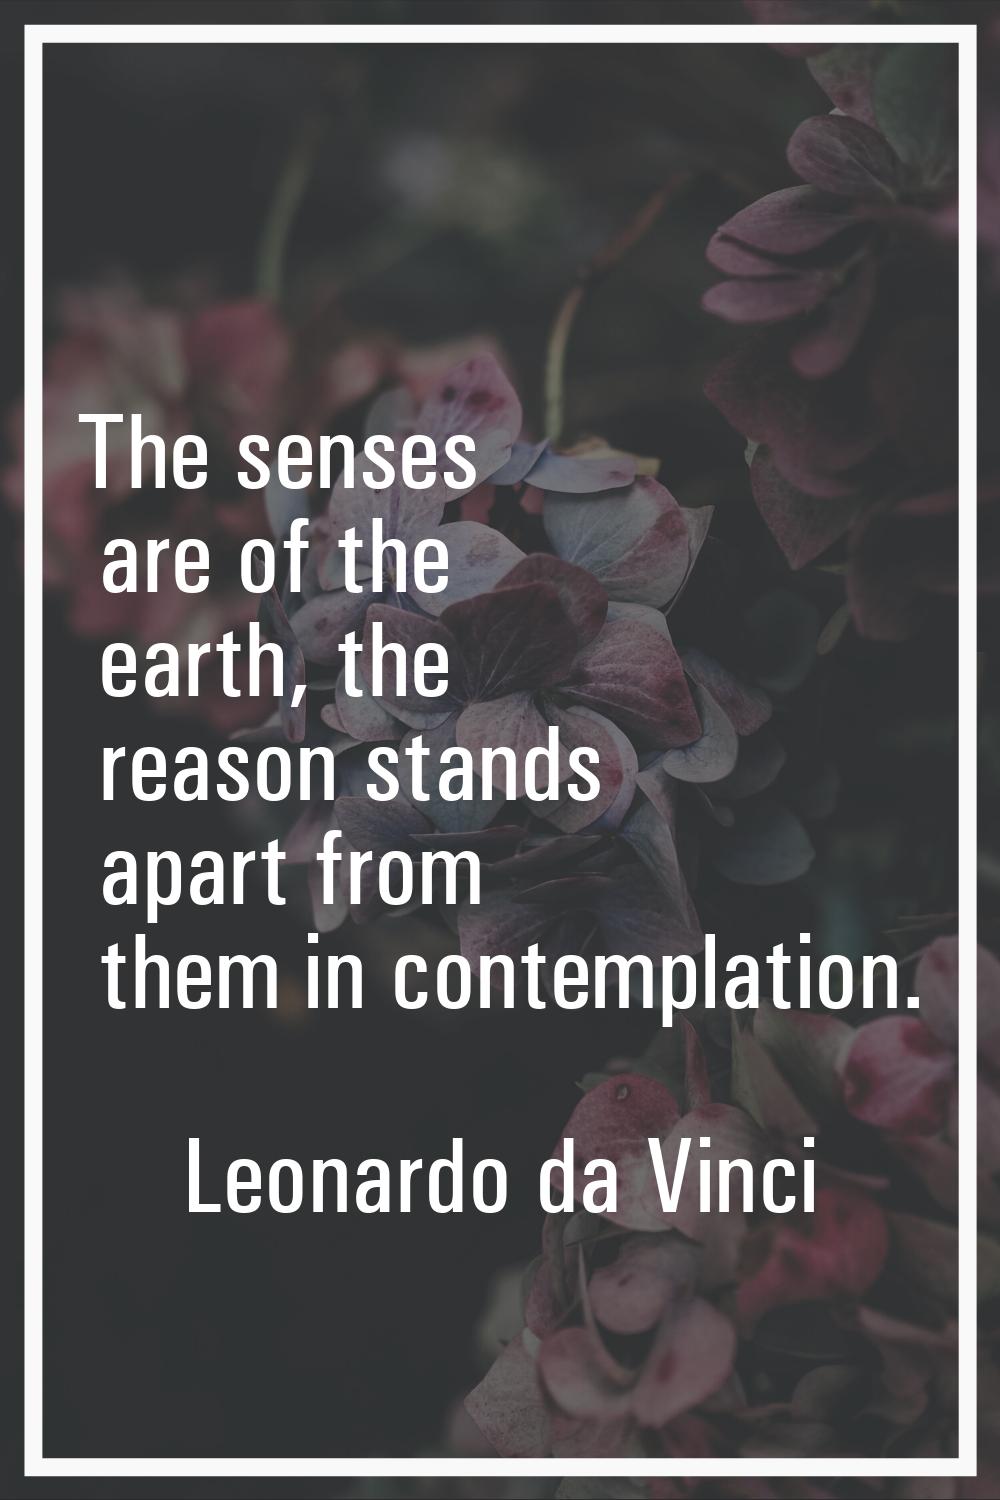 The senses are of the earth, the reason stands apart from them in contemplation.